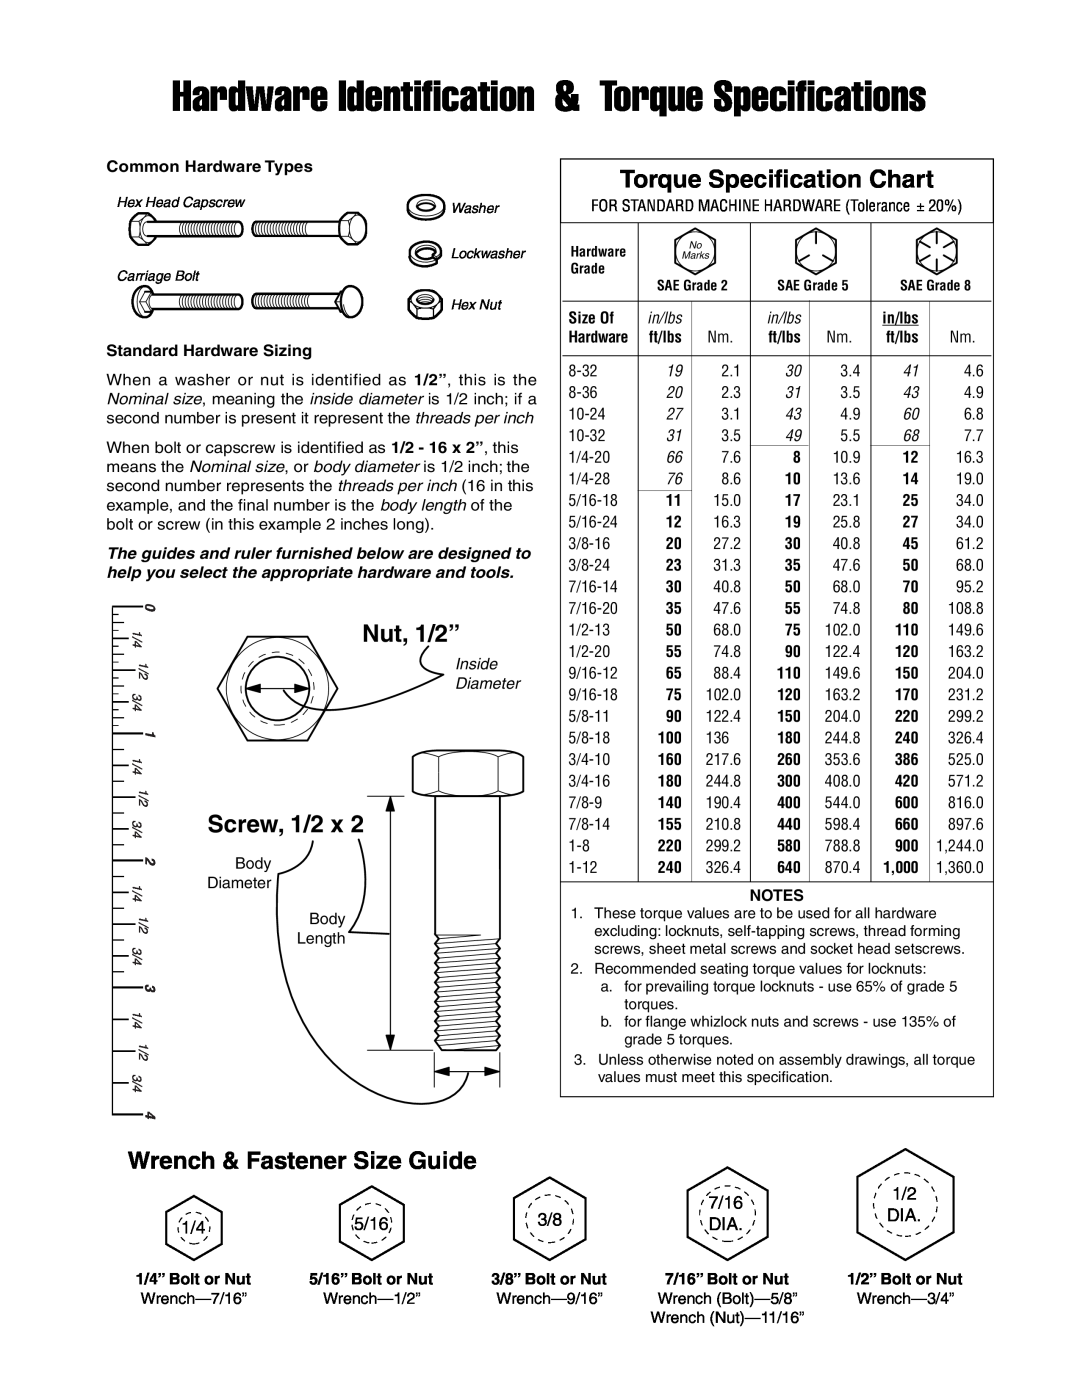 Snapper 1694147 manual Torque Specification Chart, Hardware Identification & Torque Specifications, Nut, 1/2”, Screw, 1/2 x 